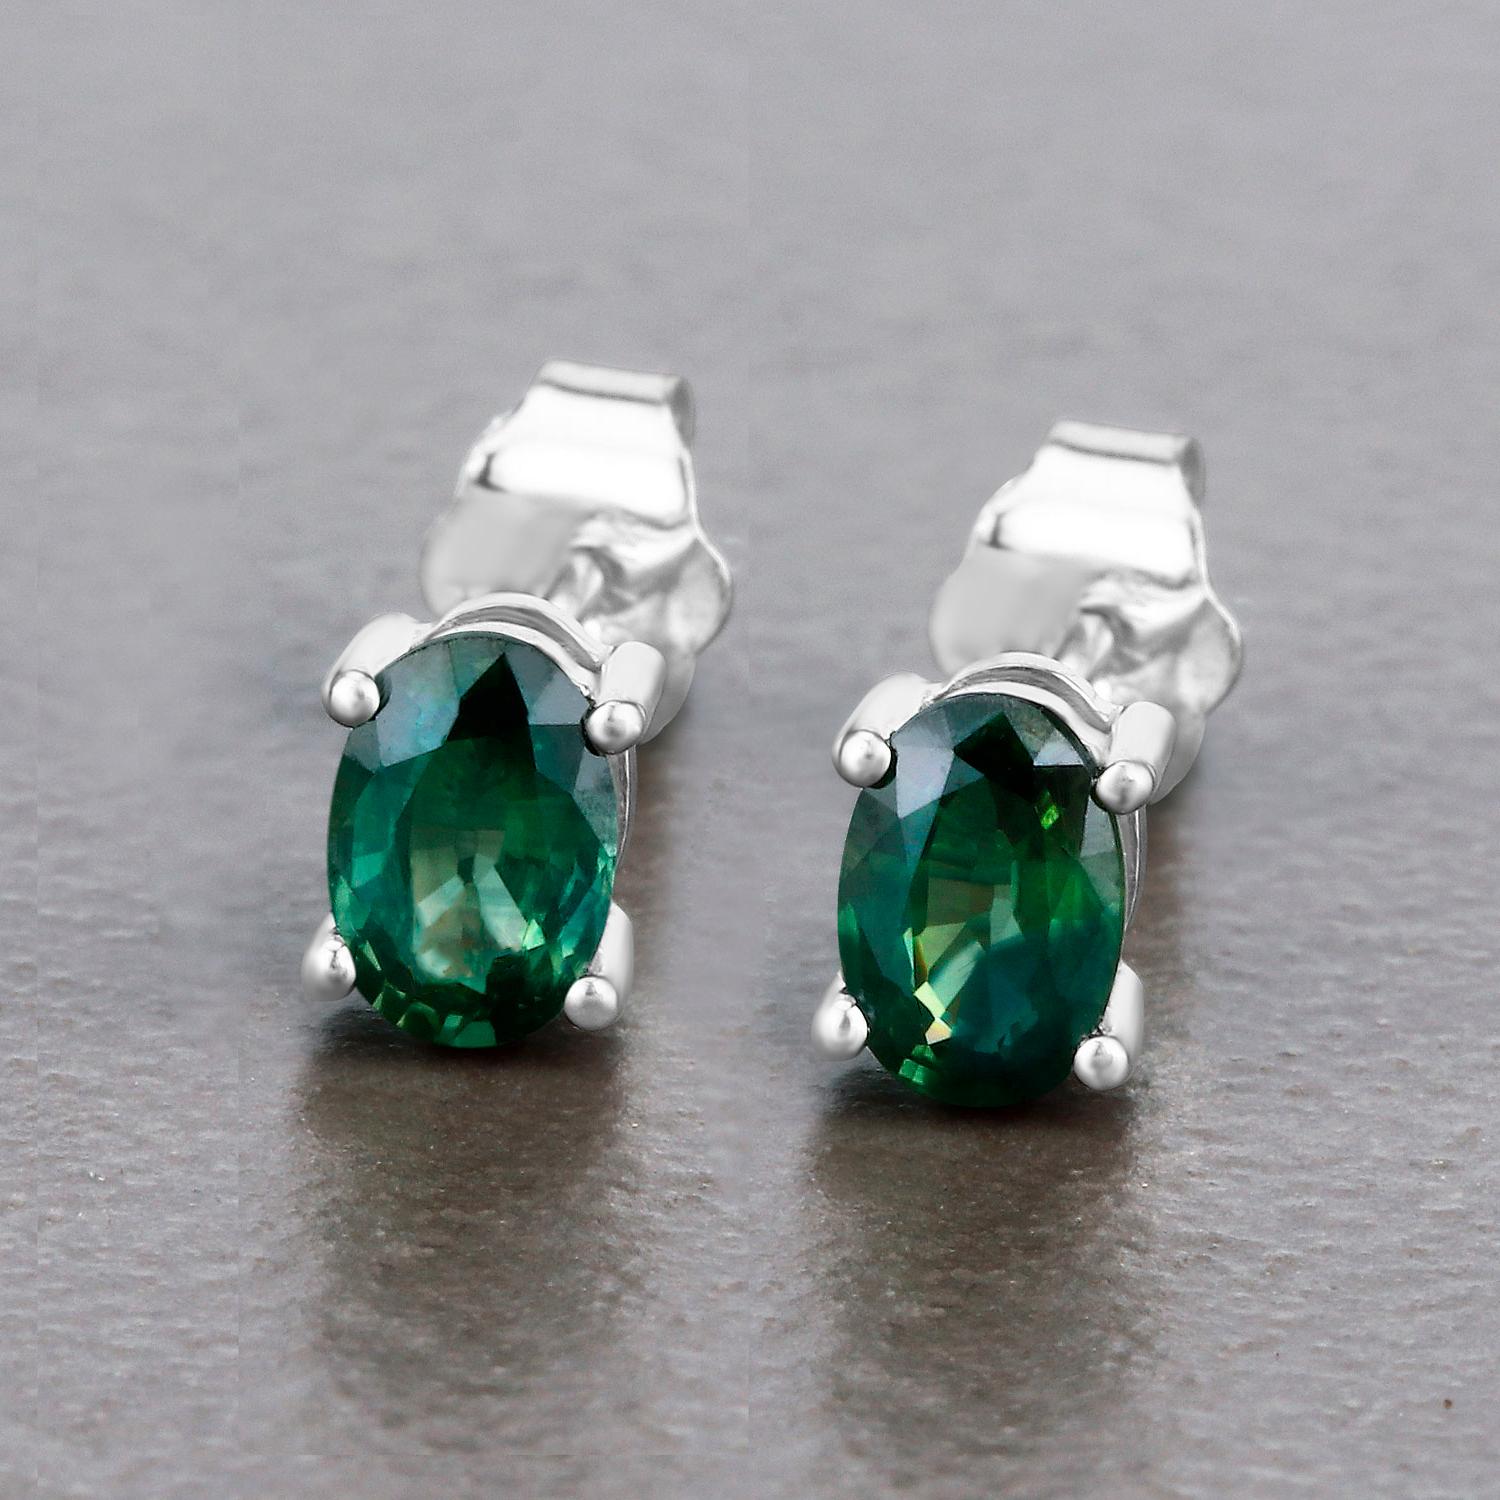 Oval Cut Green Sapphire Stud Earrings 1.16 Carats 14K White Gold For Sale